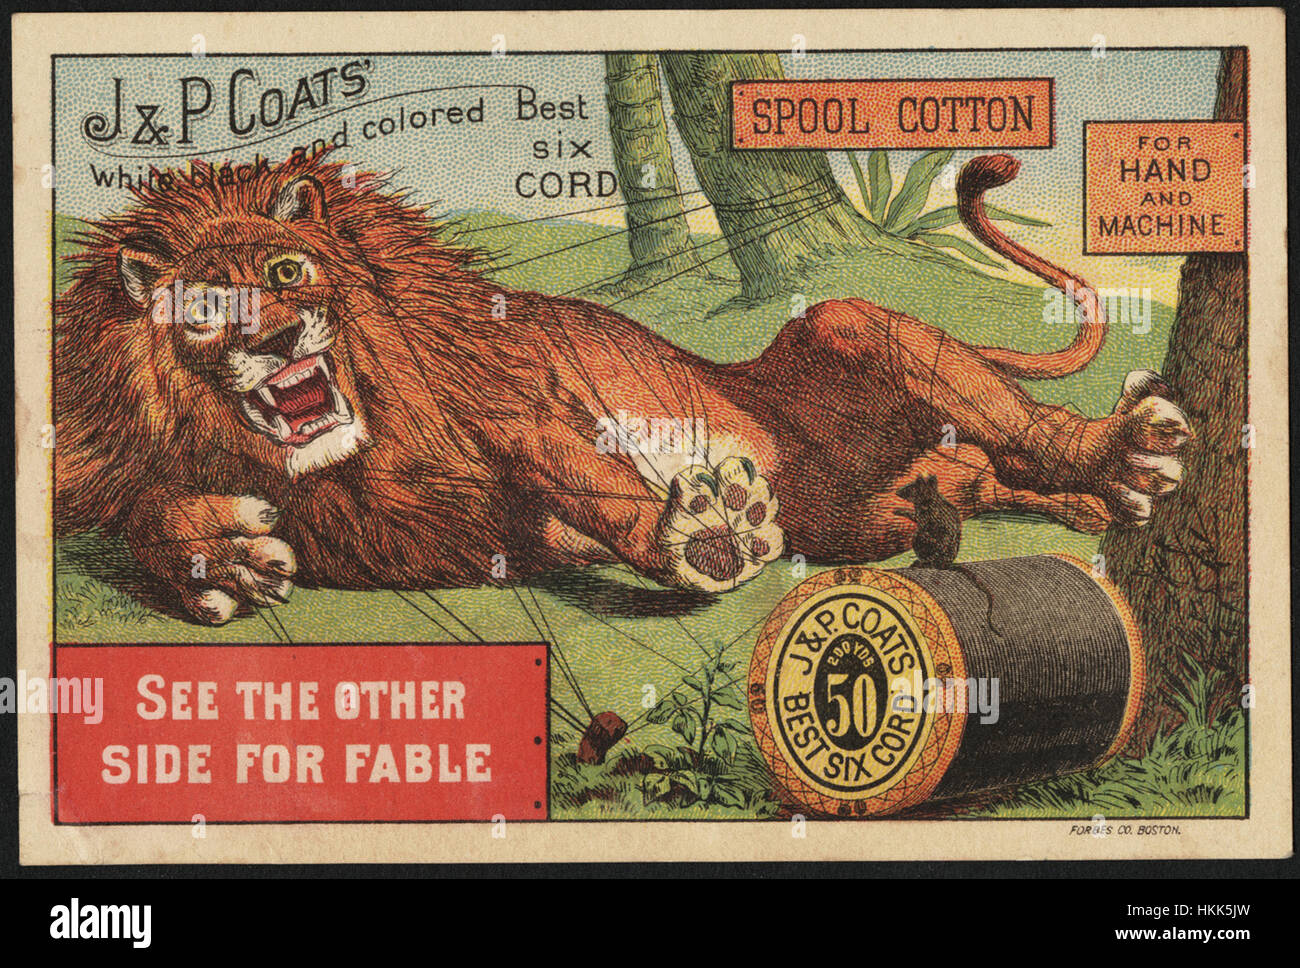 J. & P. Coats' white, black & colored. Best six cord spool cotton for hand and machine. See the other side for fable. Stock Photo